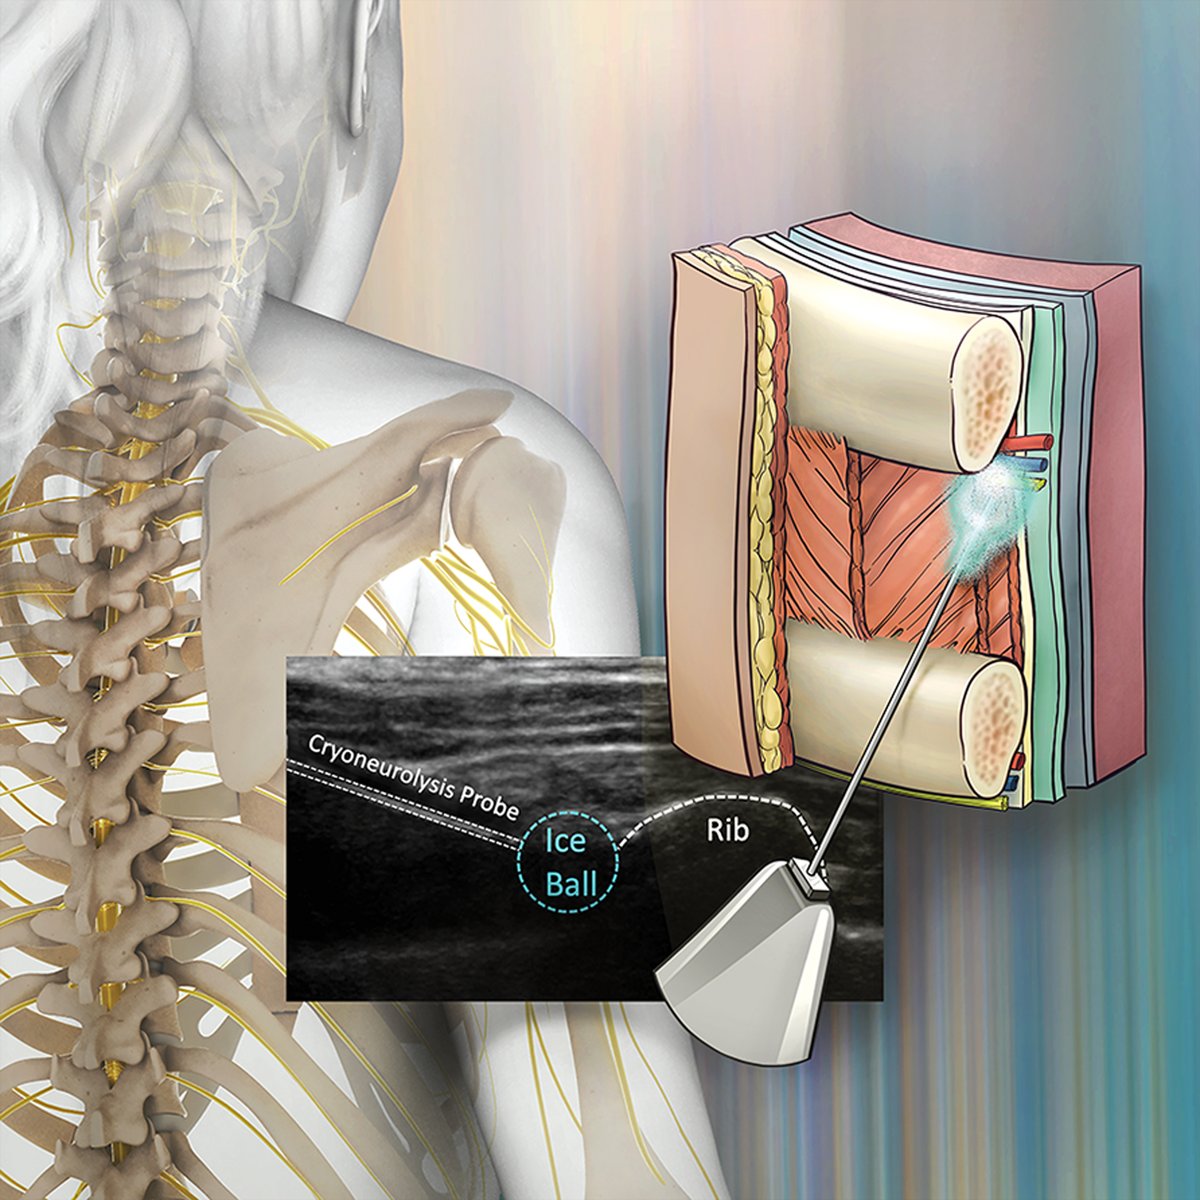 After breast surgery, patients receiving paravertebral #anesthetic blocks plus intercostal #cryoneurolysis reported less pain on postoperative day 2 compared to those receiving the same blocks without cryoneurolysis. Learn more: ow.ly/ORjU50NBCgL